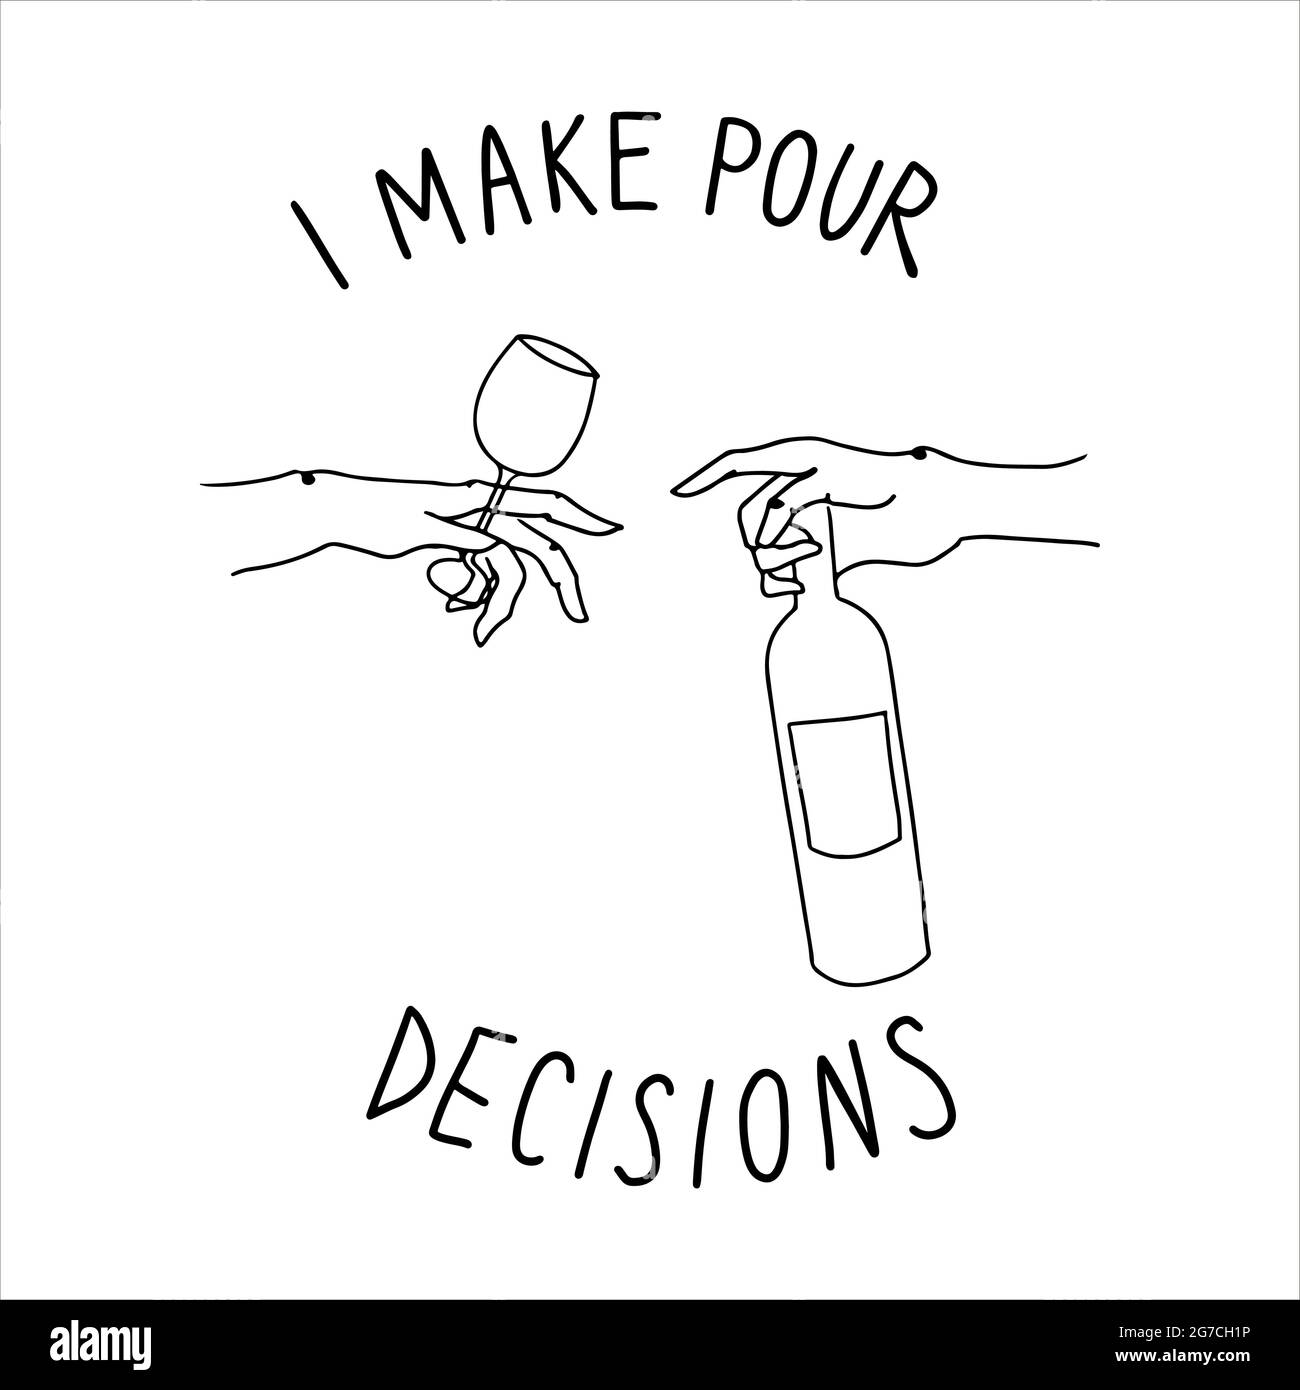 I make pour decisions, handwritten lettering with one line drawing, funny quotes, alcohol, drinking design, t-shirt design for cricut Stock Vector